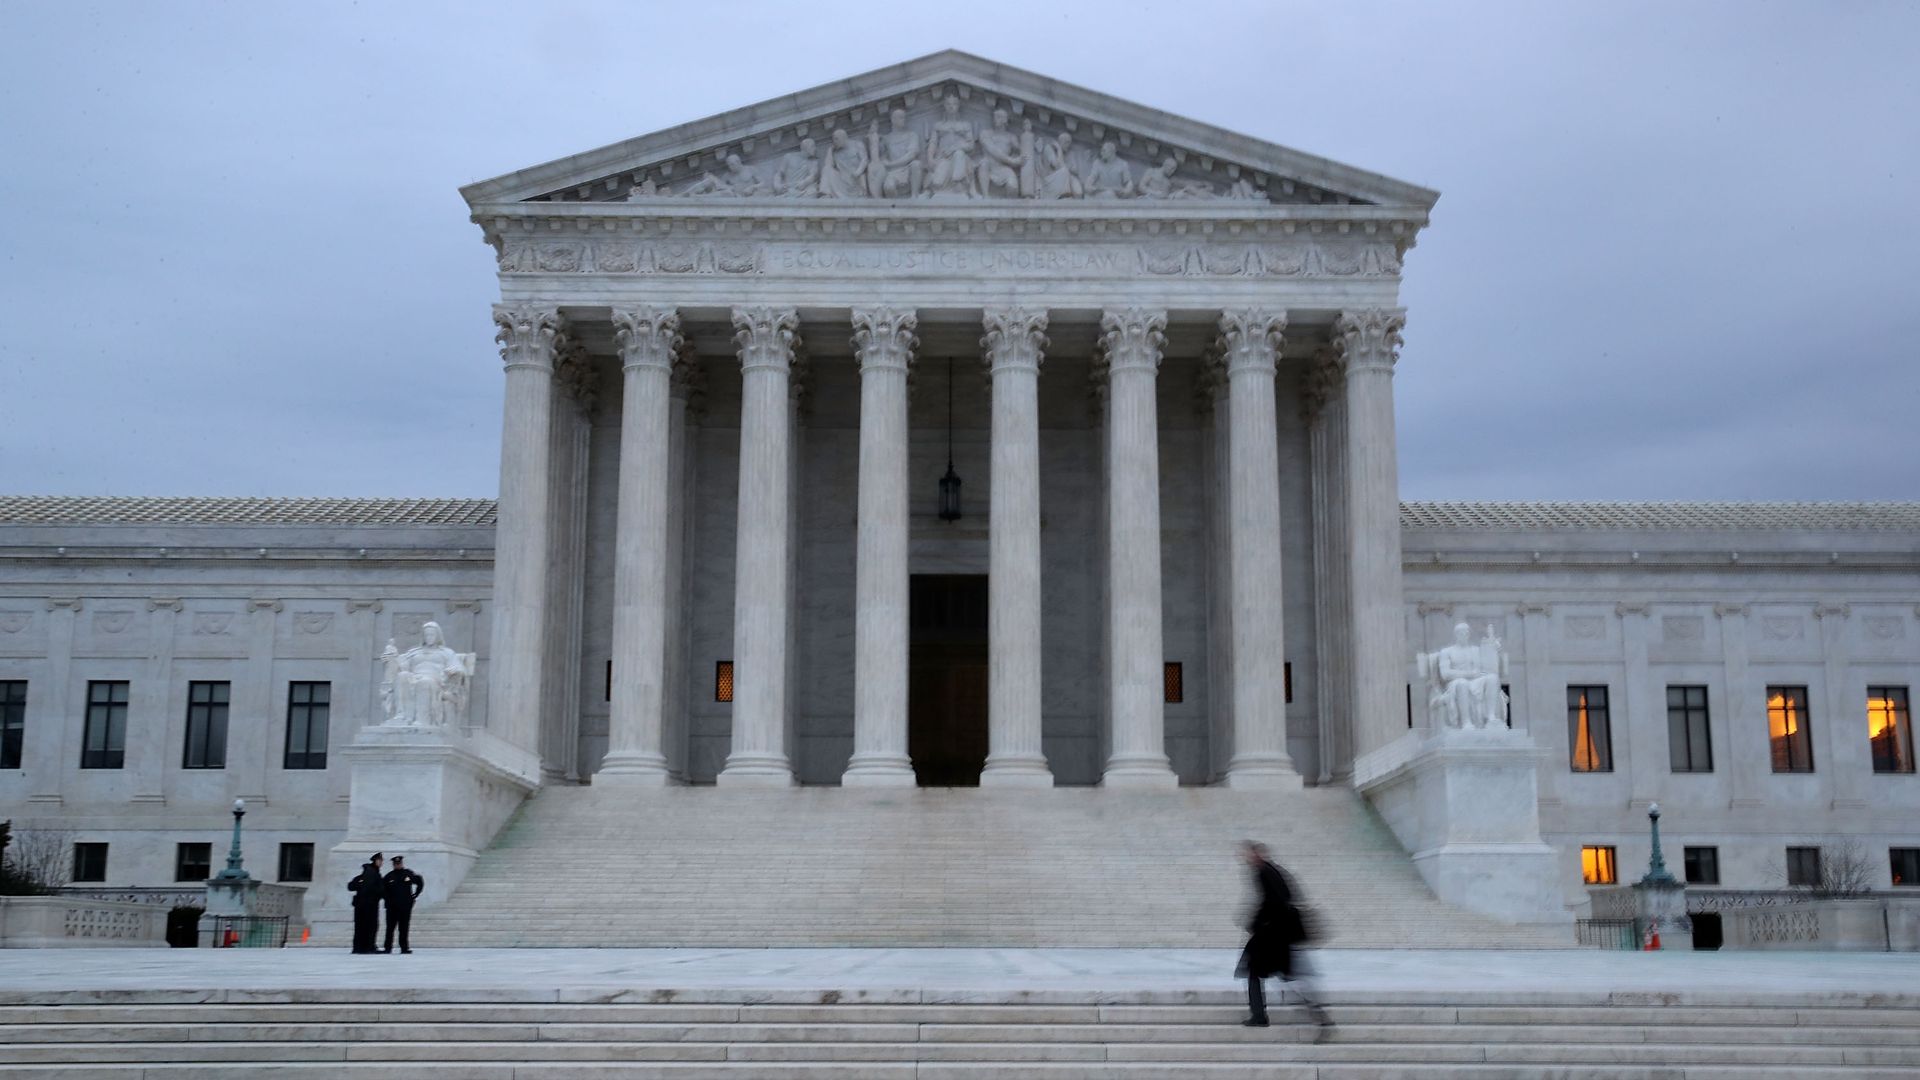 A man walks up the steps of the U.S. Supreme Court on January 31, 2017 in Washington, DC.